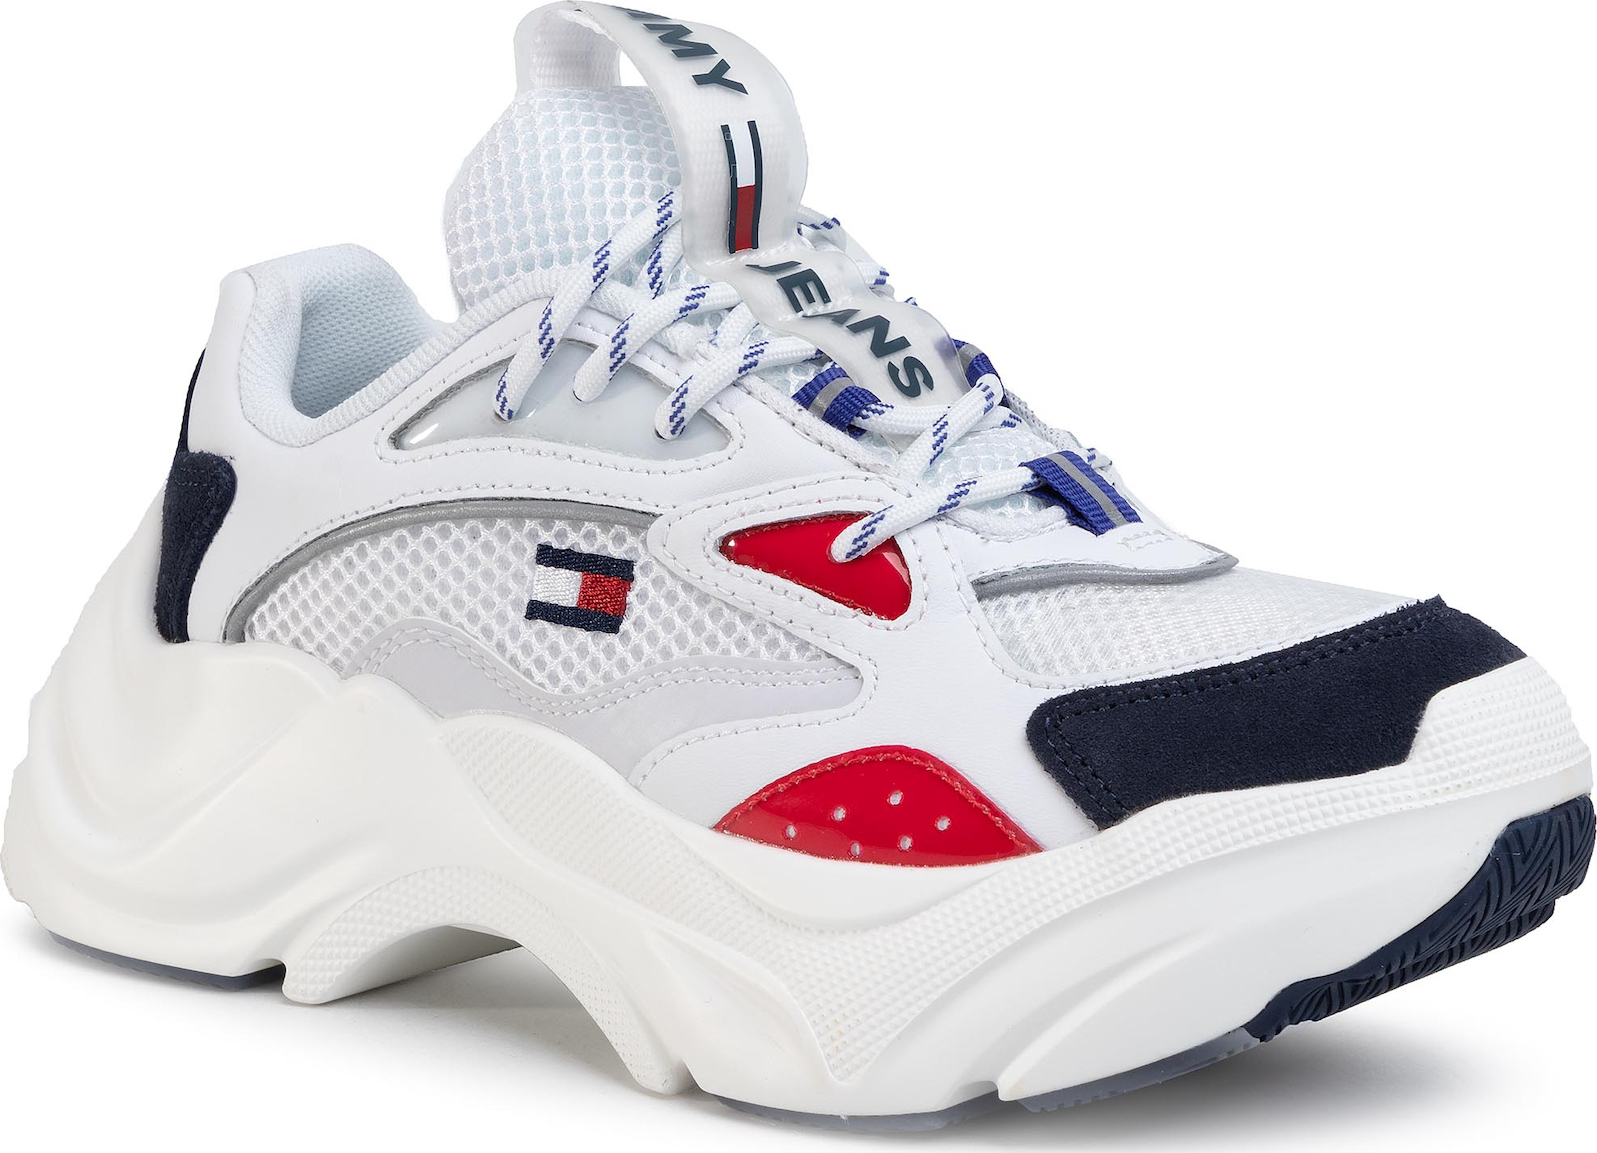 Tommy Hilfiger Sneakers Skroutz Denmark, SAVE 54% aveclumiere.com